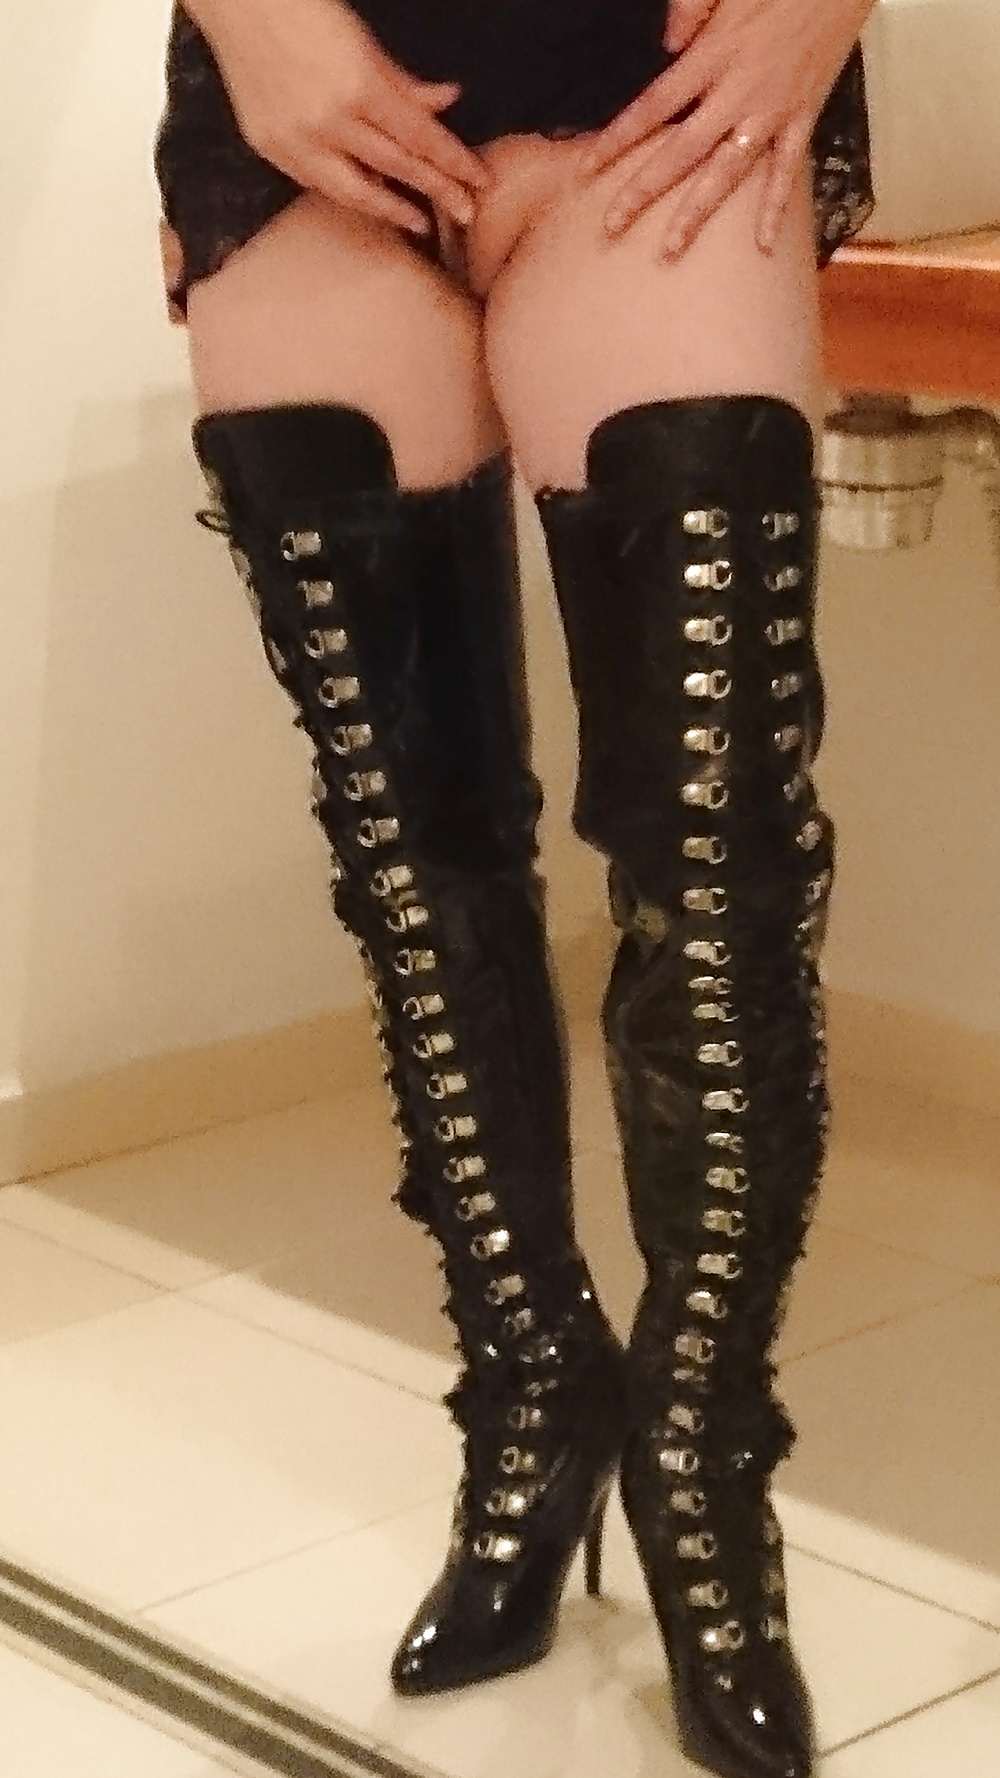 Wife_in_boots (7/9)